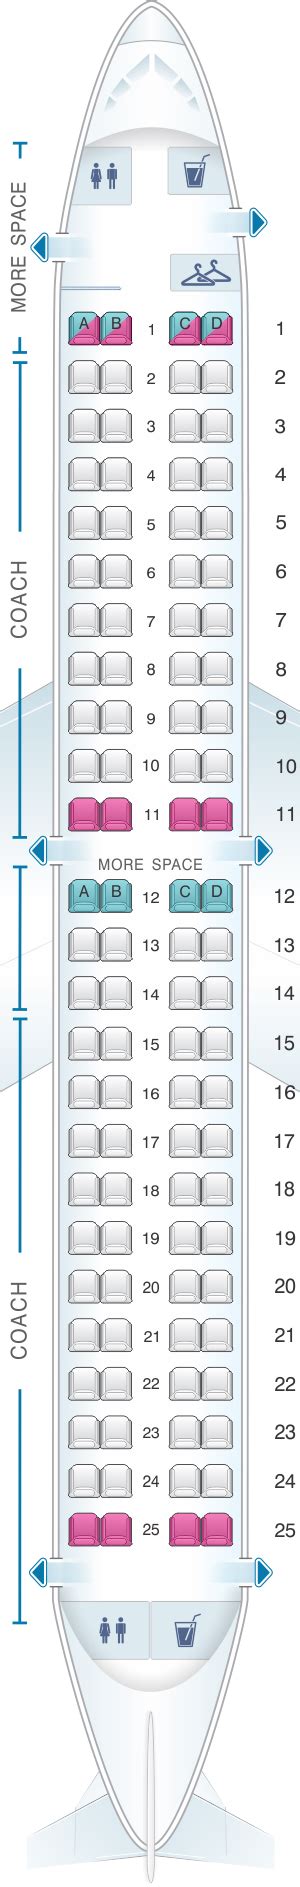 E190 jetblue seat map. The rest of the E-190 has a seat pitch of 32″ – still slightly more than other carriers standard of 31″. Due to this reconfiguration, the extra legroom is removed from the rest of the seats aft of the exit row. The E-190 is an enjoyable regional jet. It’s such a hybrid I have trouble calling it a regional jet in comparison to the ... 